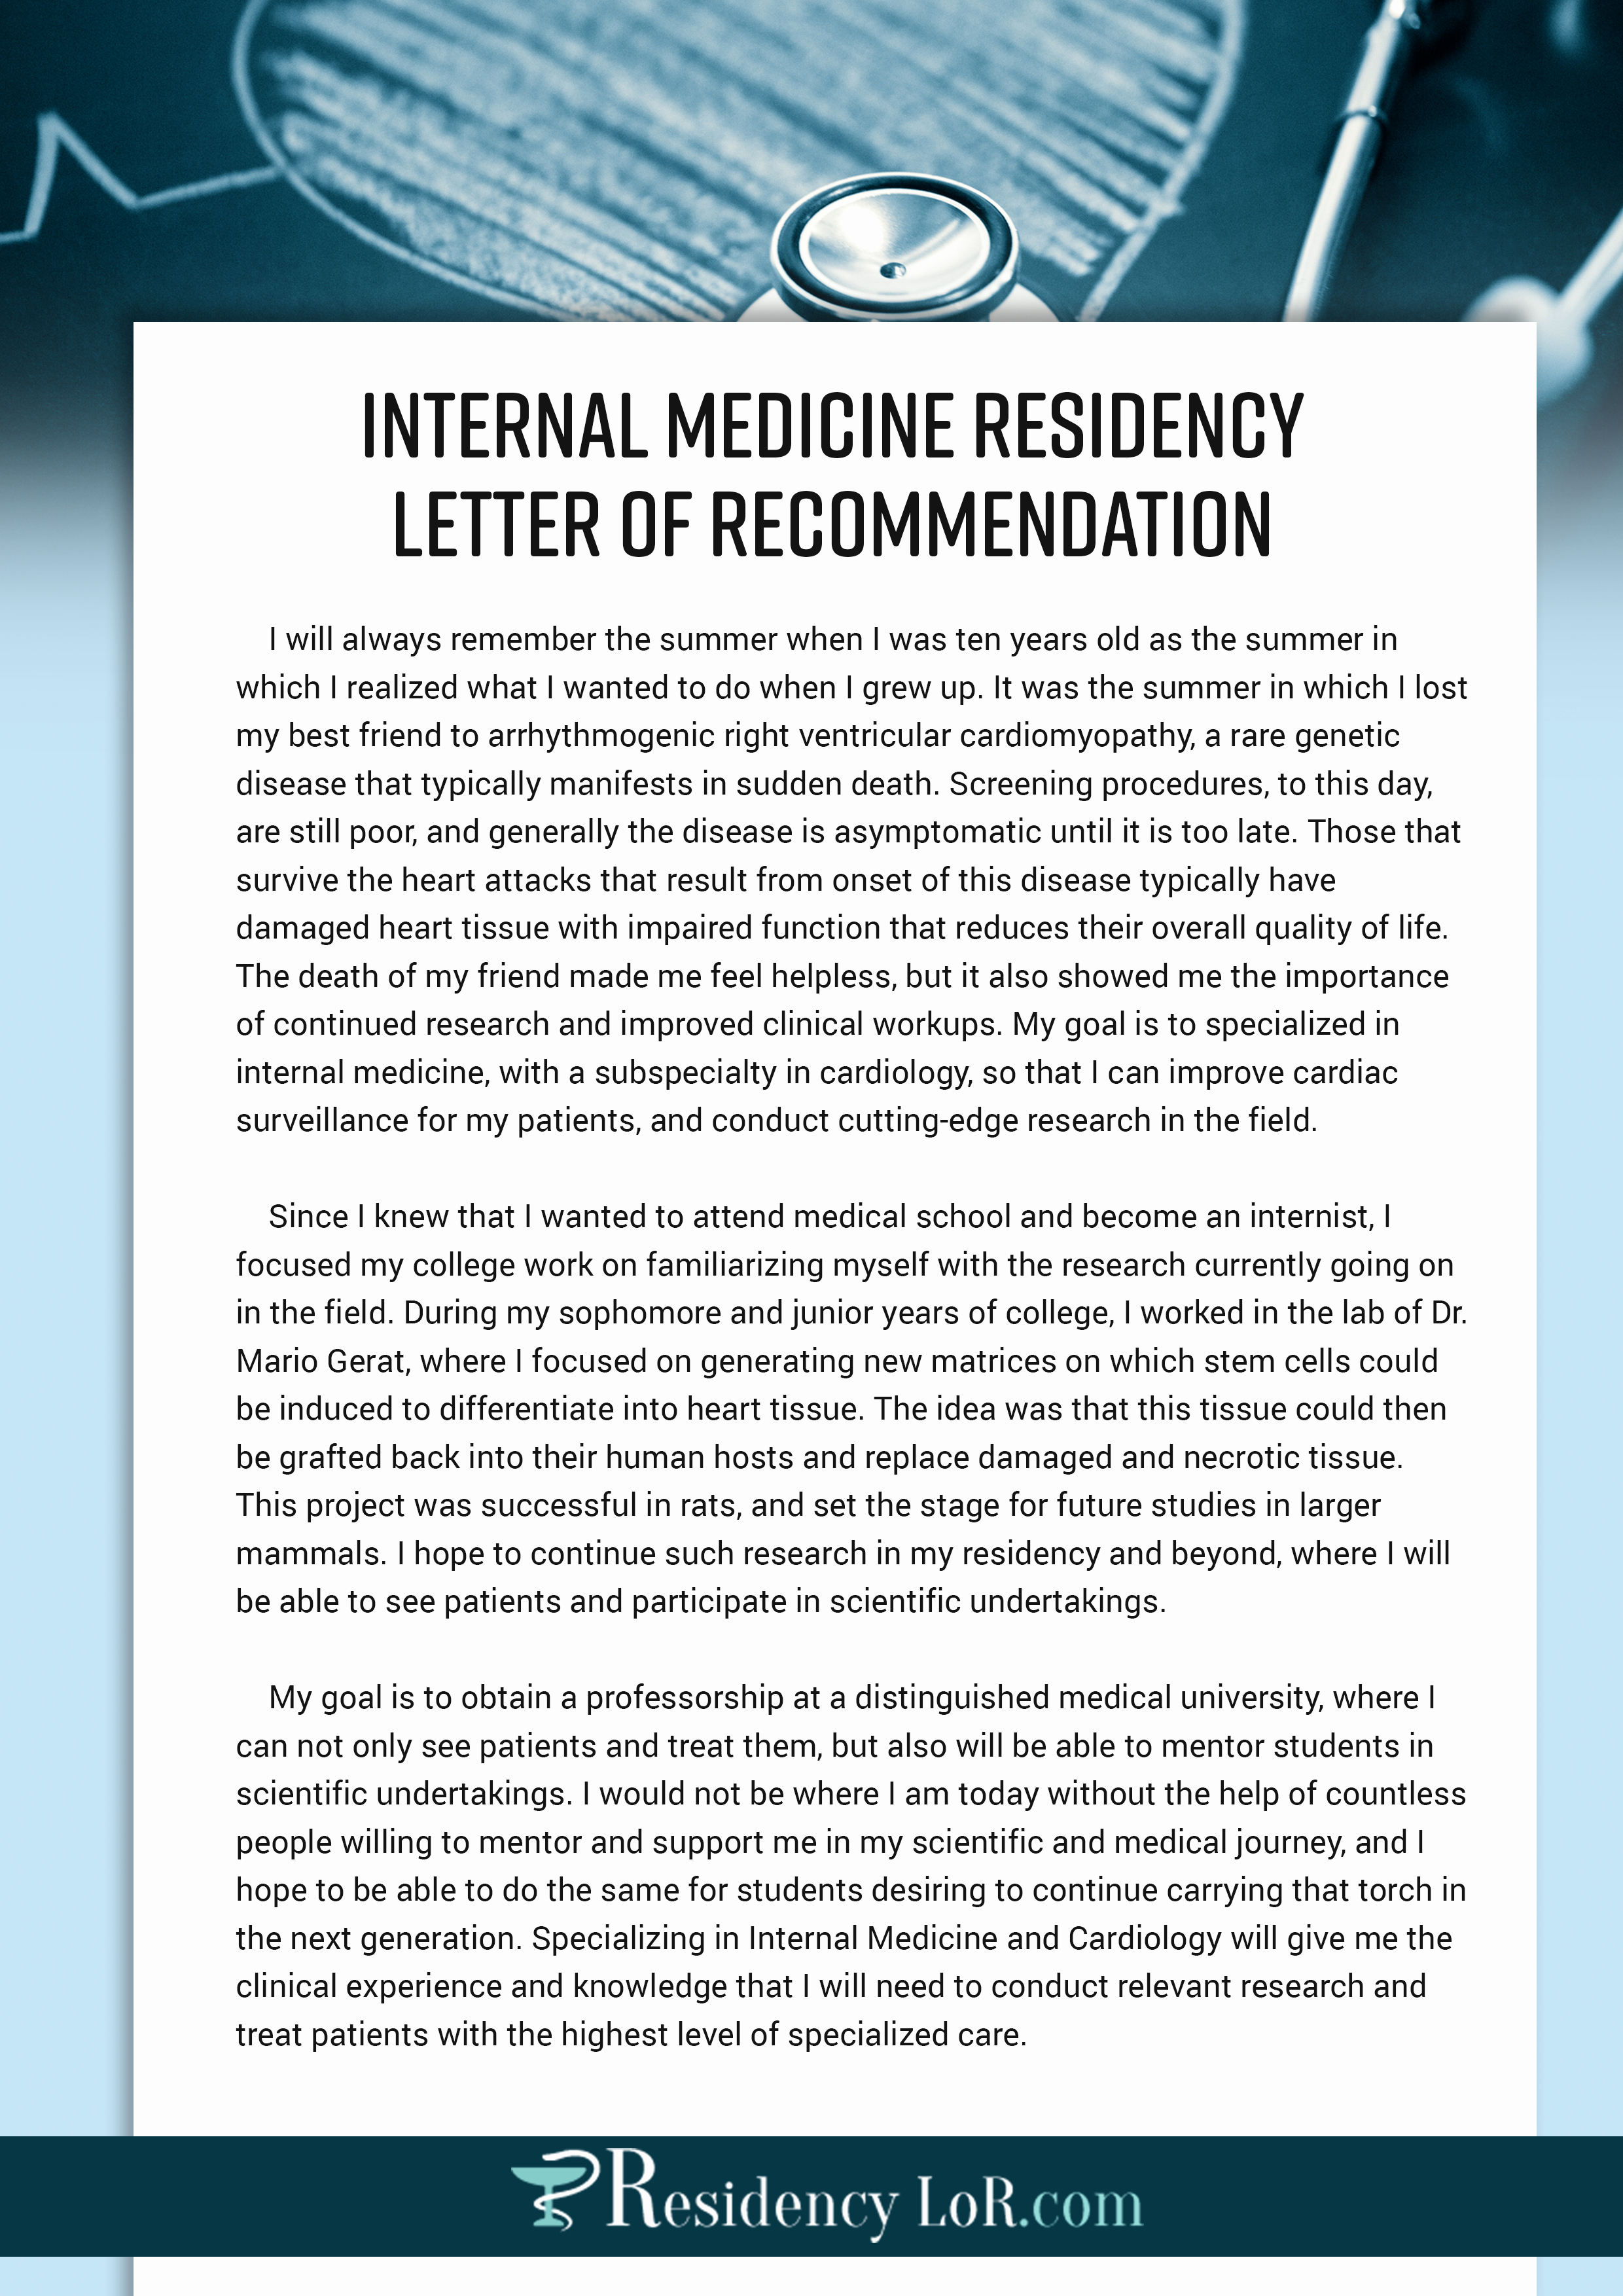 Letter Of Recommendation Requirements Lovely Sample Letter Of Re Mendation for Internal Medicine